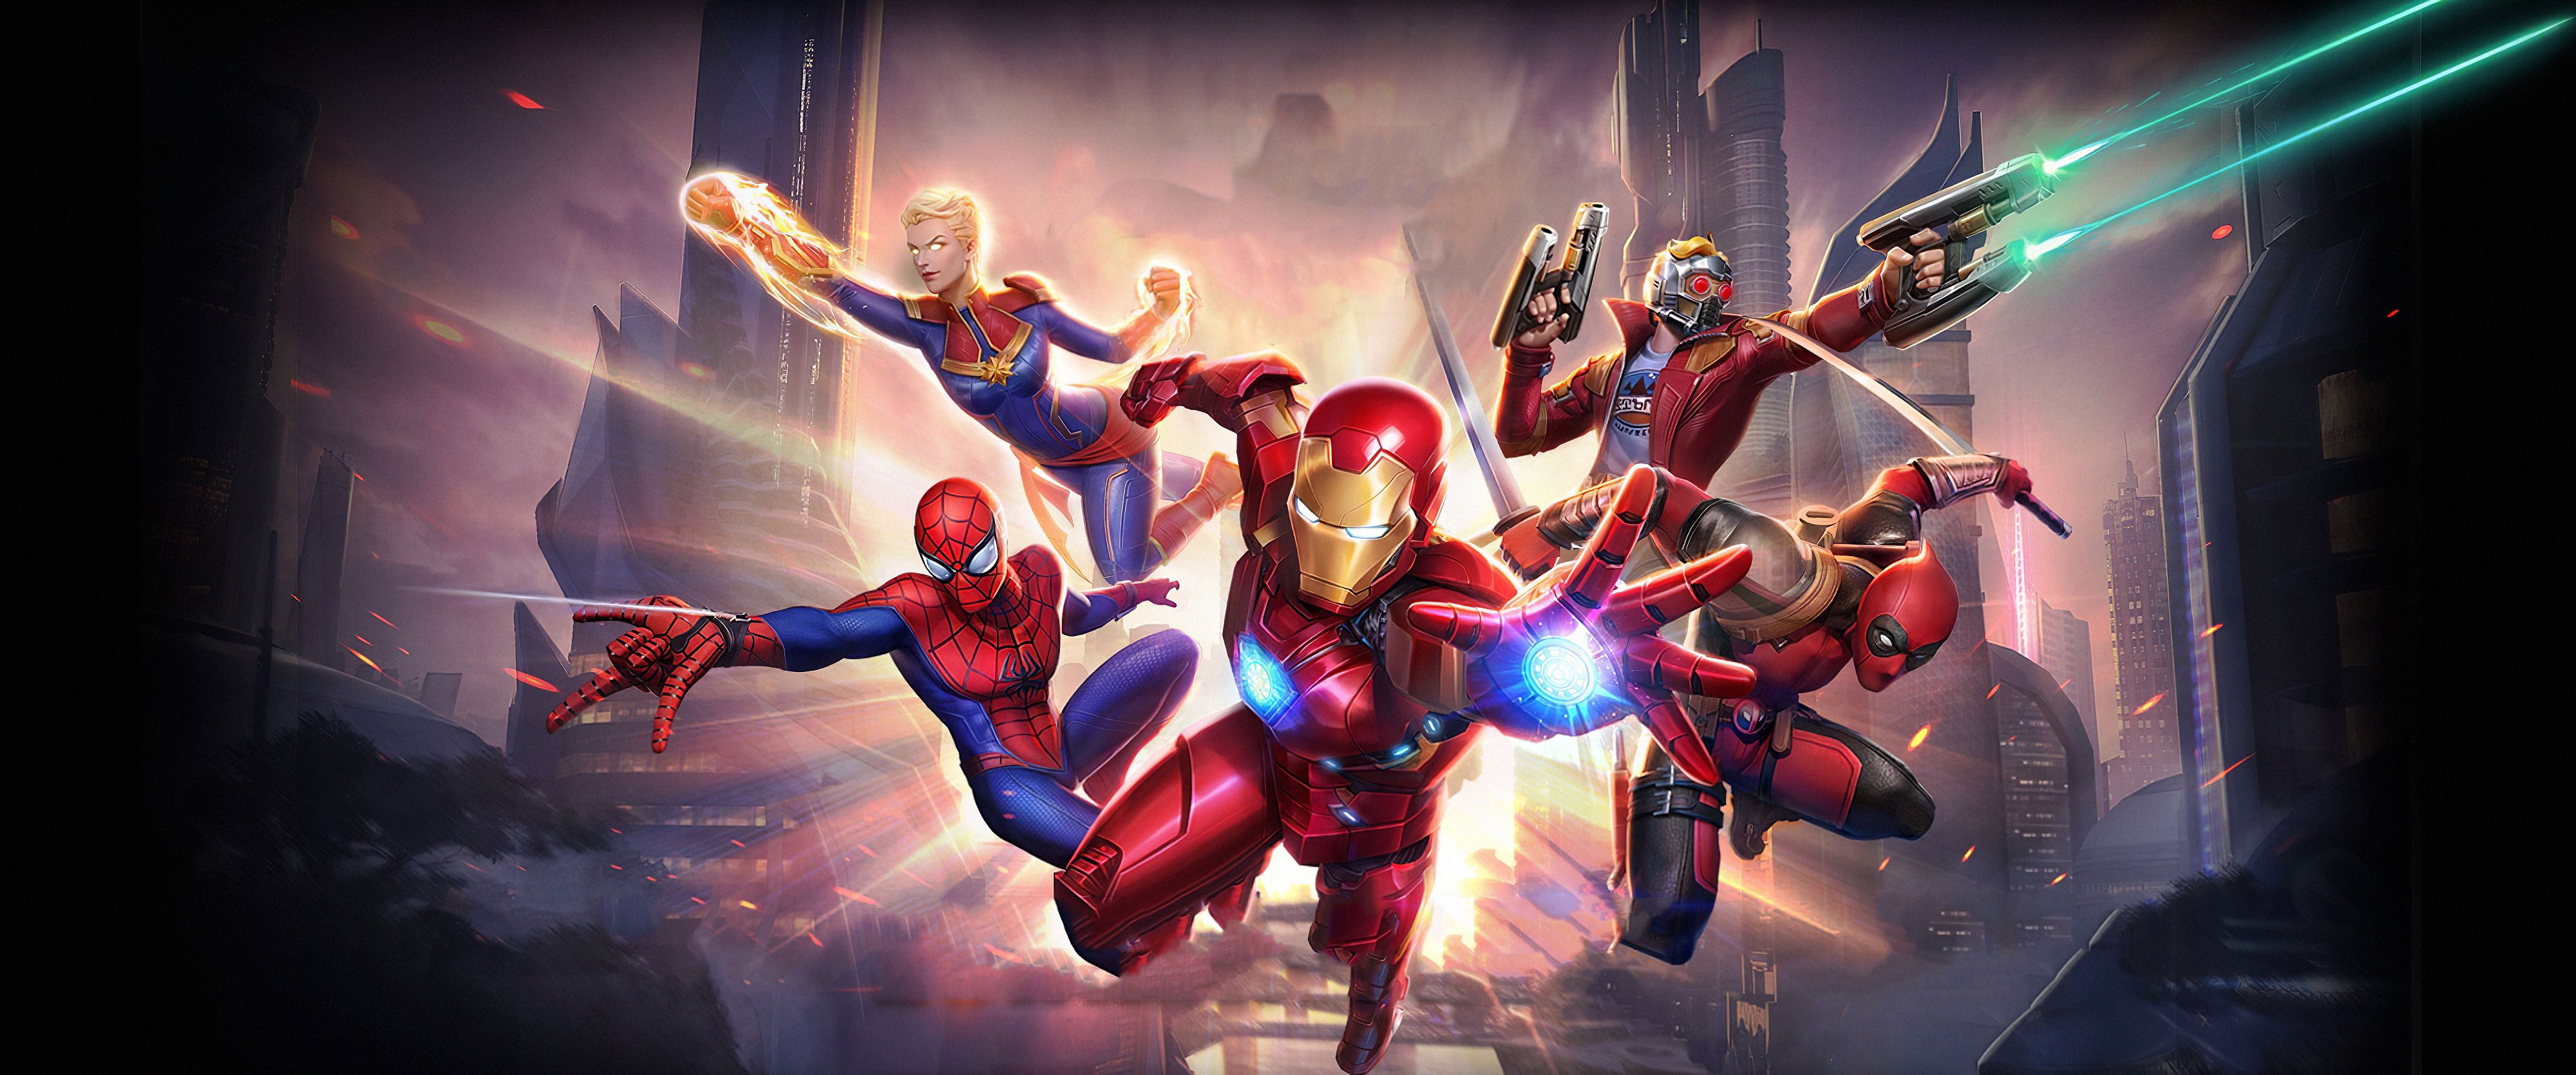 Marvel Super War, HD Games, 4k Wallpaper, Image, Background, Photo and Picture